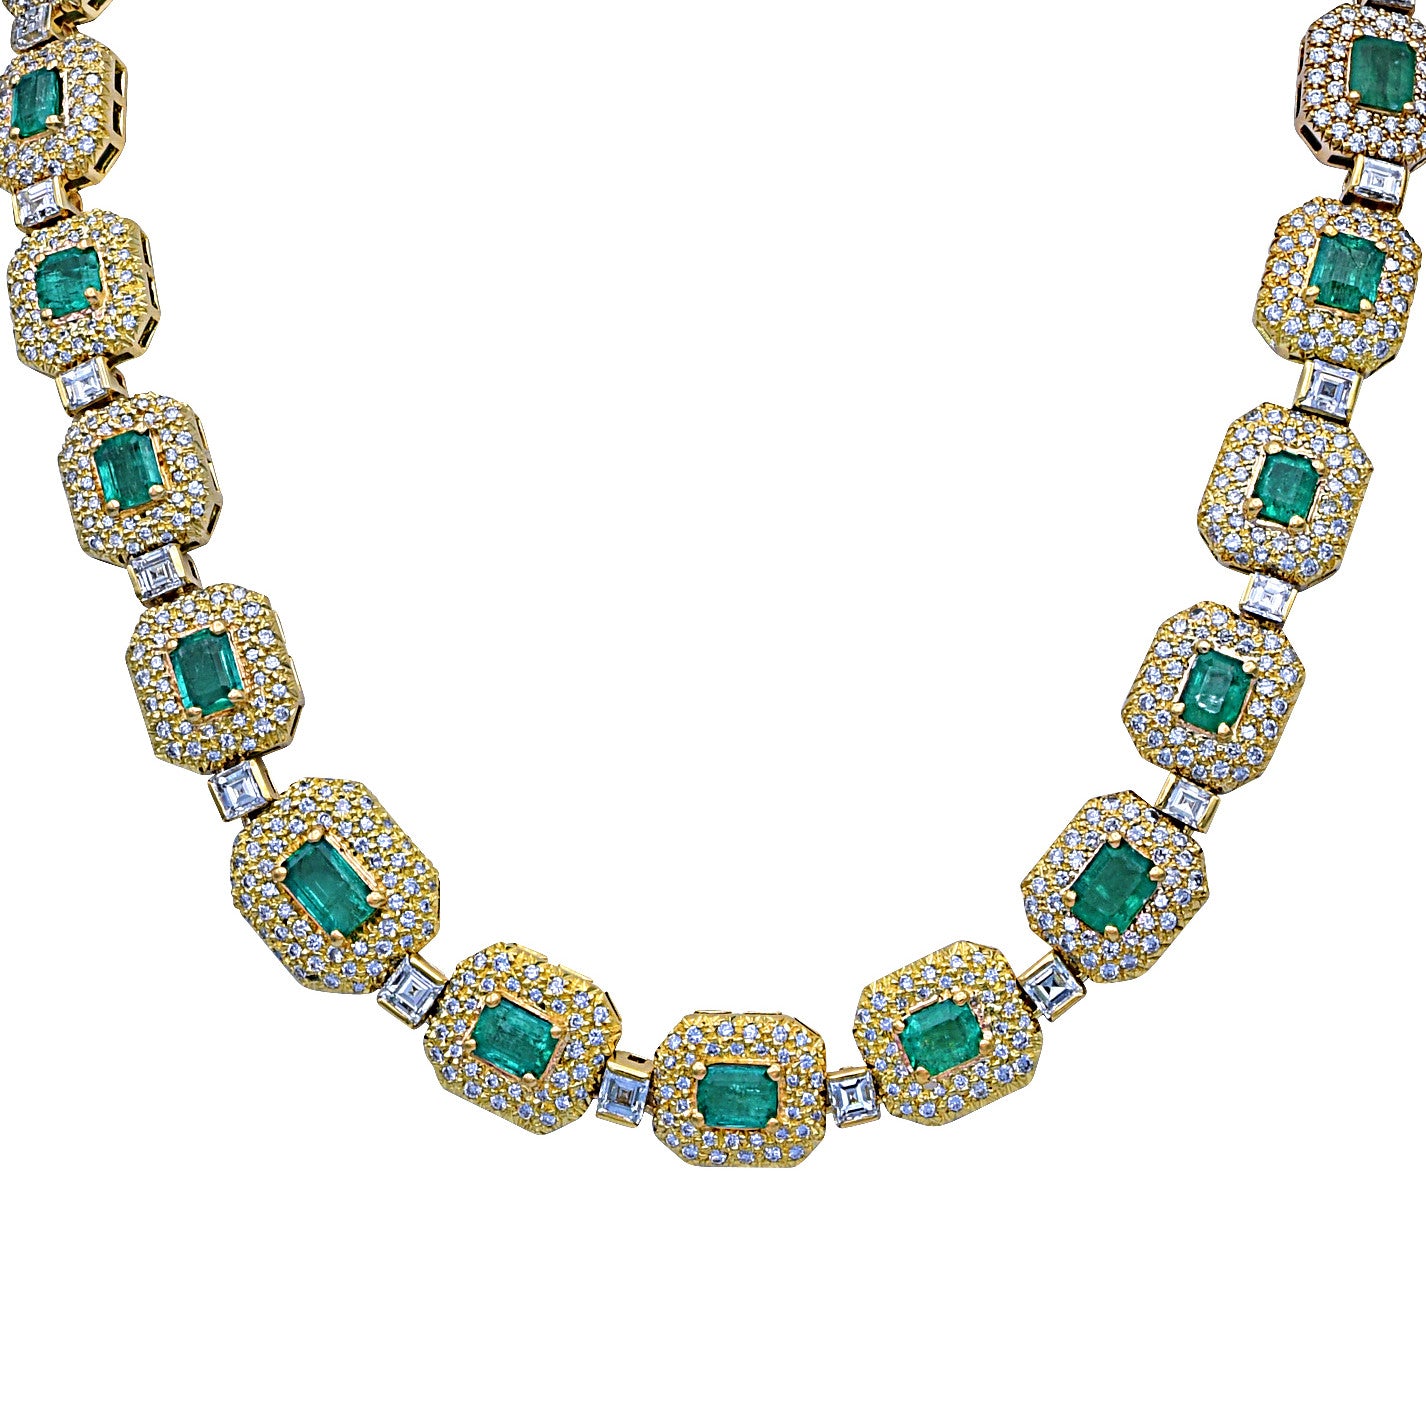 Post-1980s 14KT Yellow Gold Emerald & Diamond Necklace front close-up view